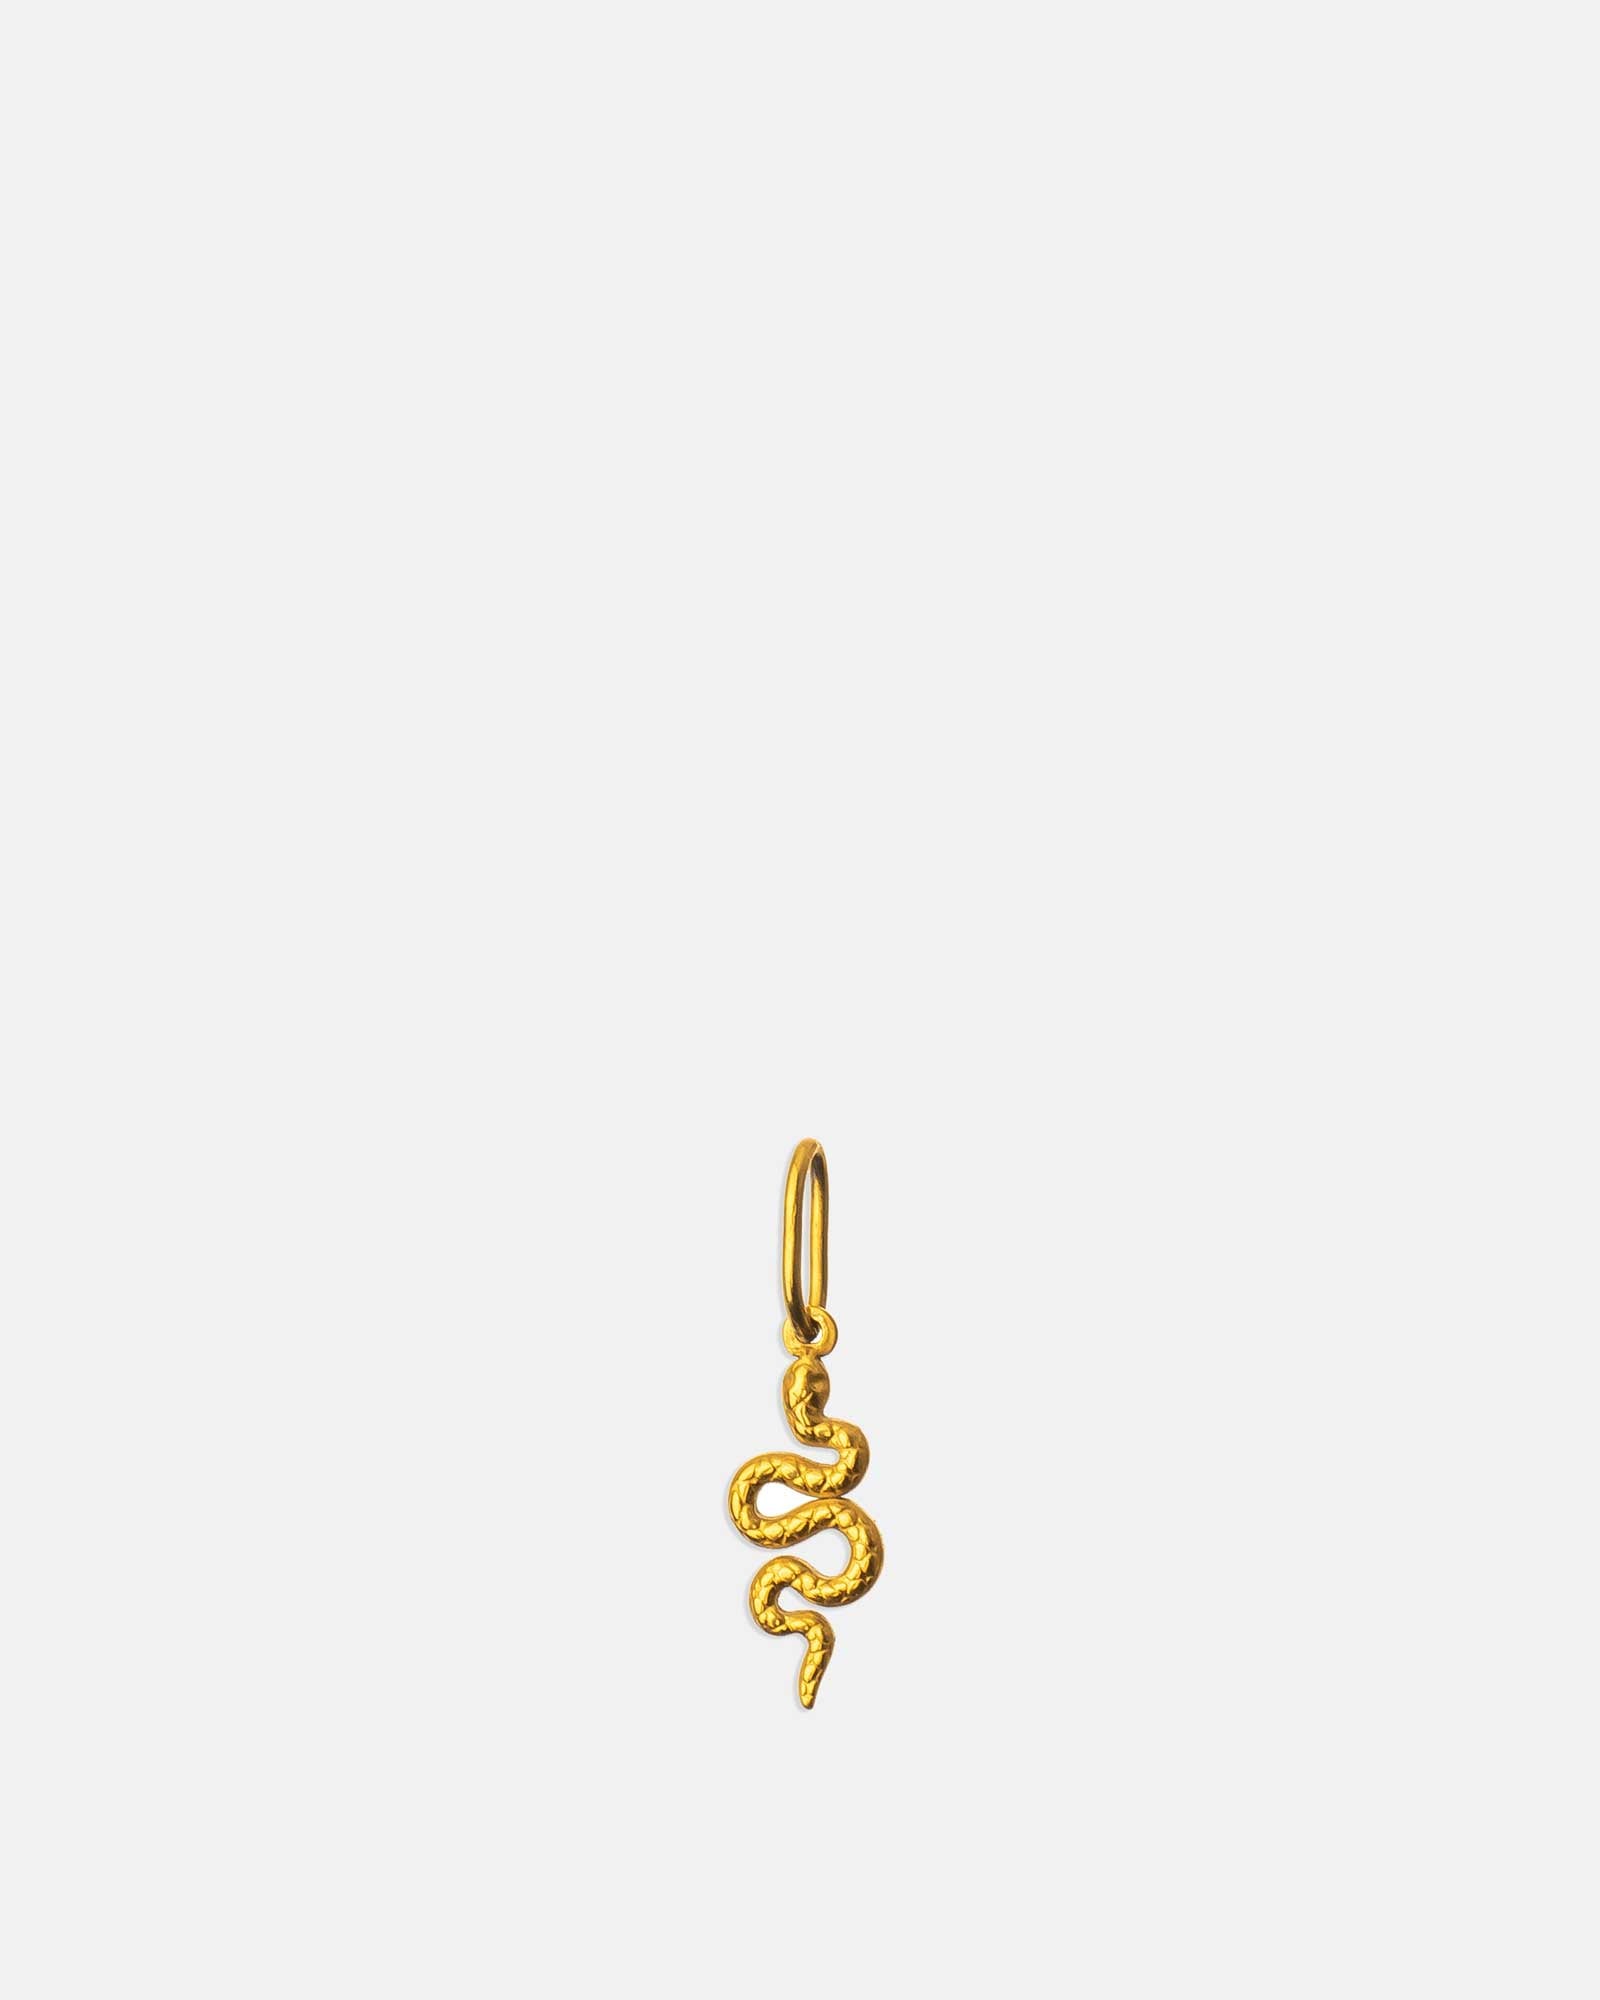 Snake - Golden Stainless Steel Pendant - Necklace Pendant - Online unissex jewelry - dicci